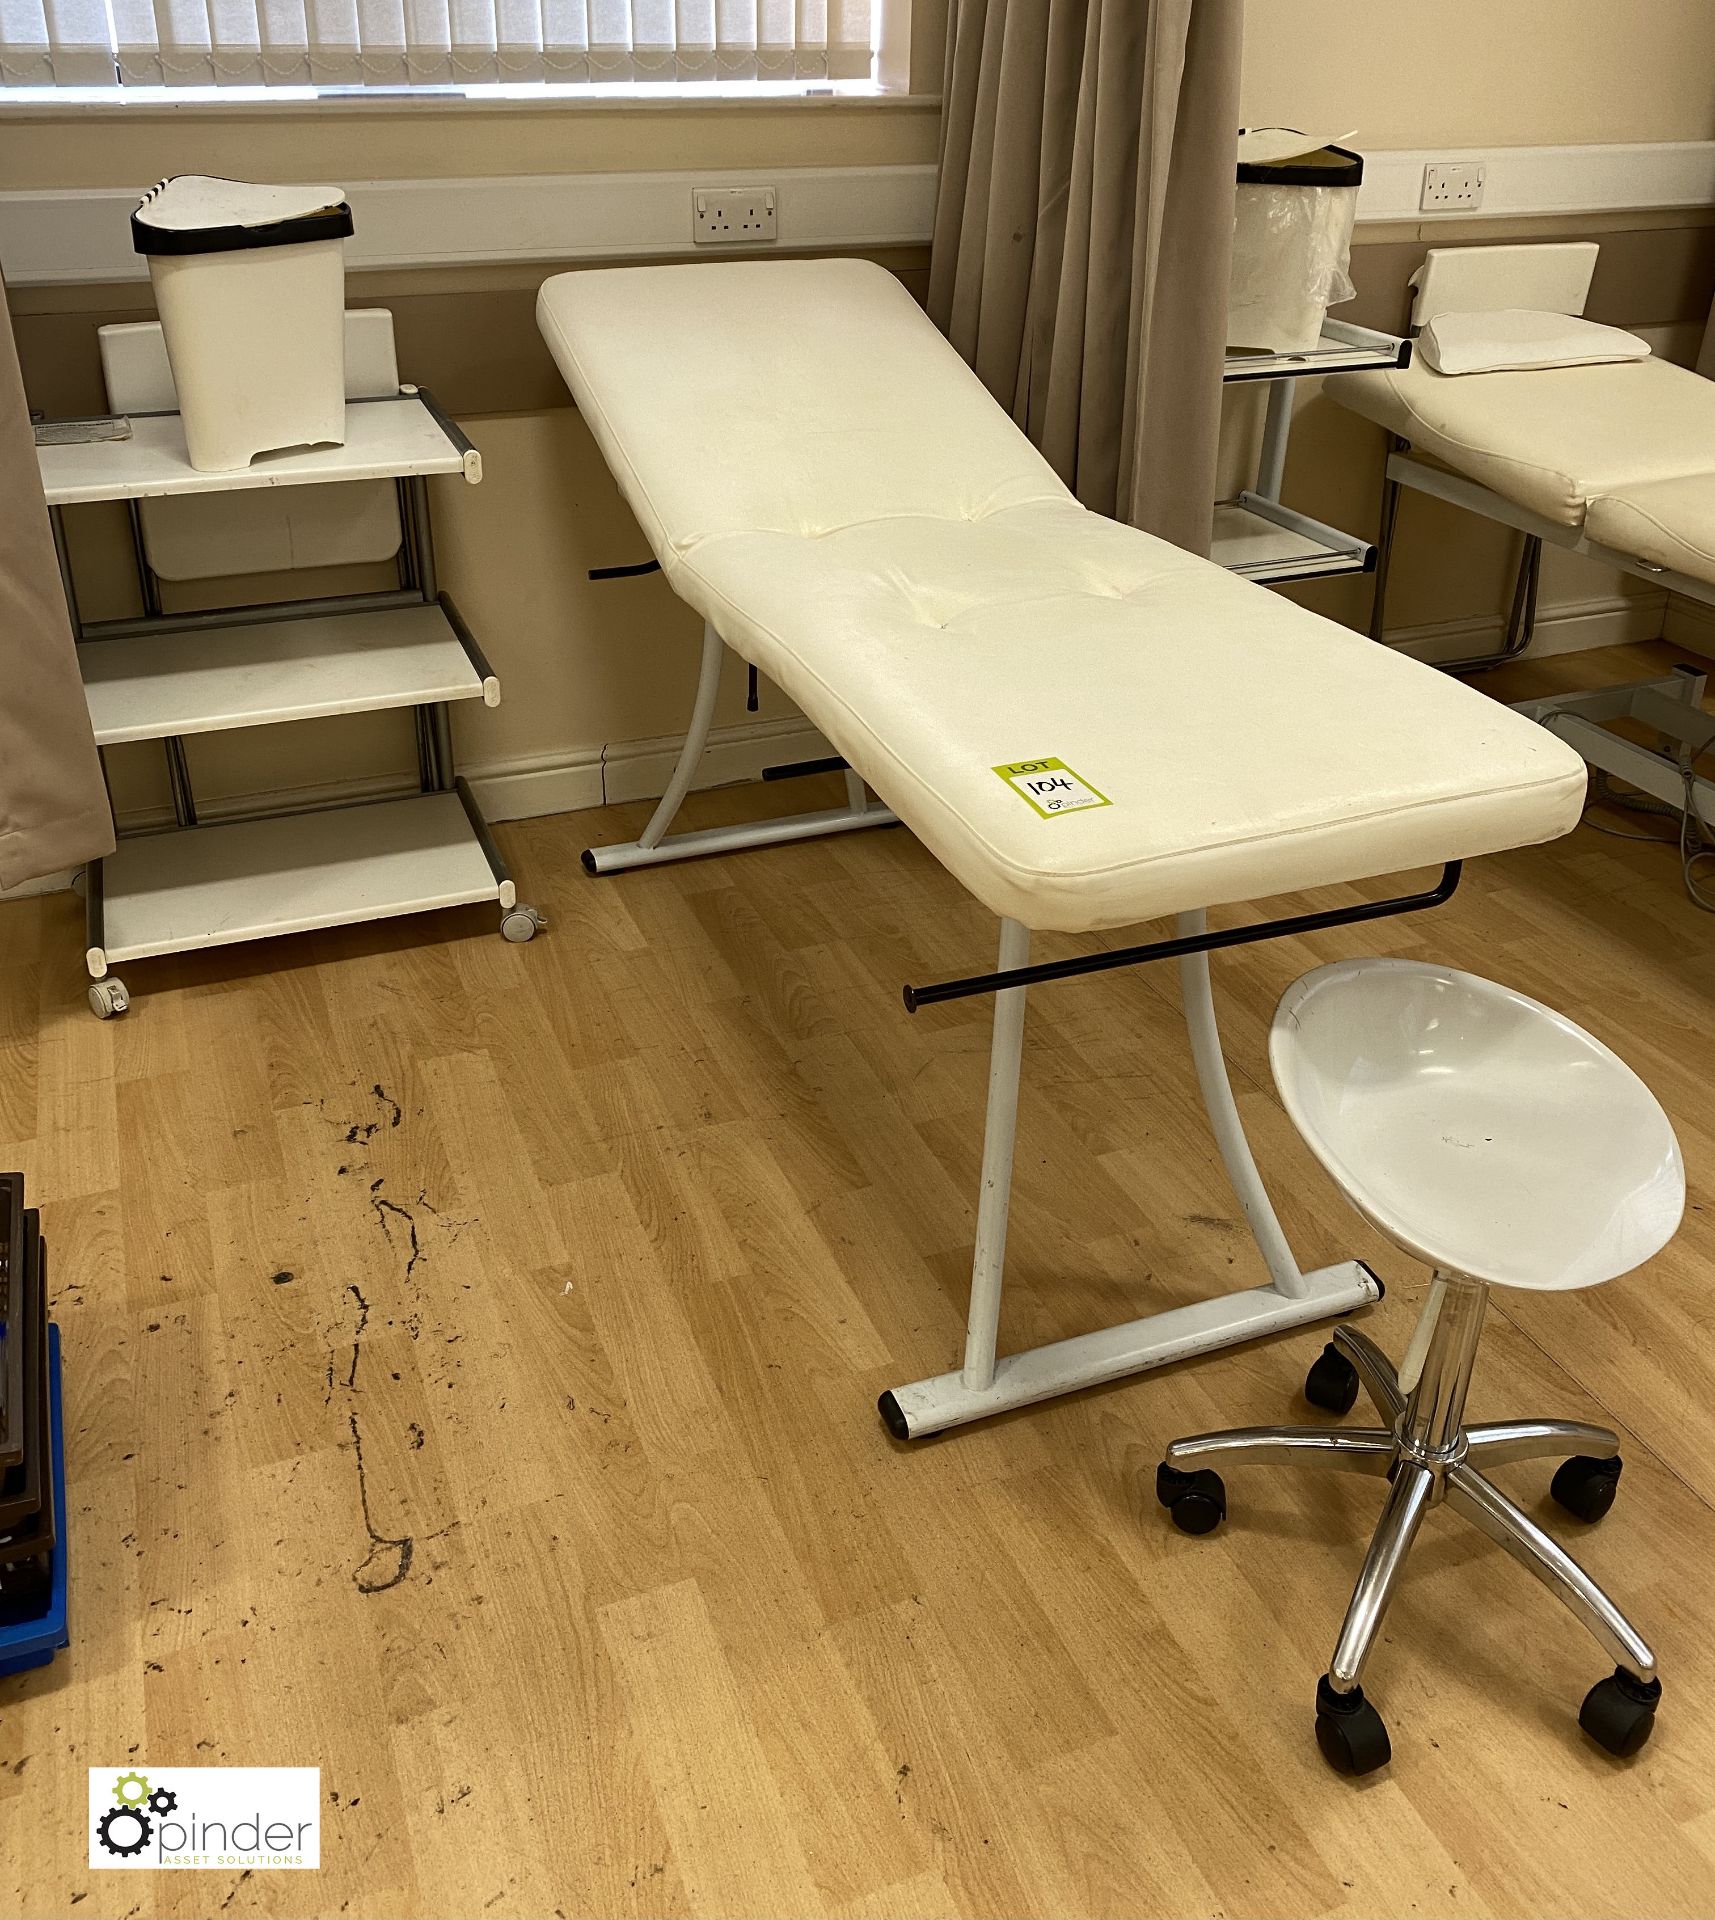 Manual adjustable Beauty Bed, with mobile trolley and stool (location: Level 3, B372 Room)